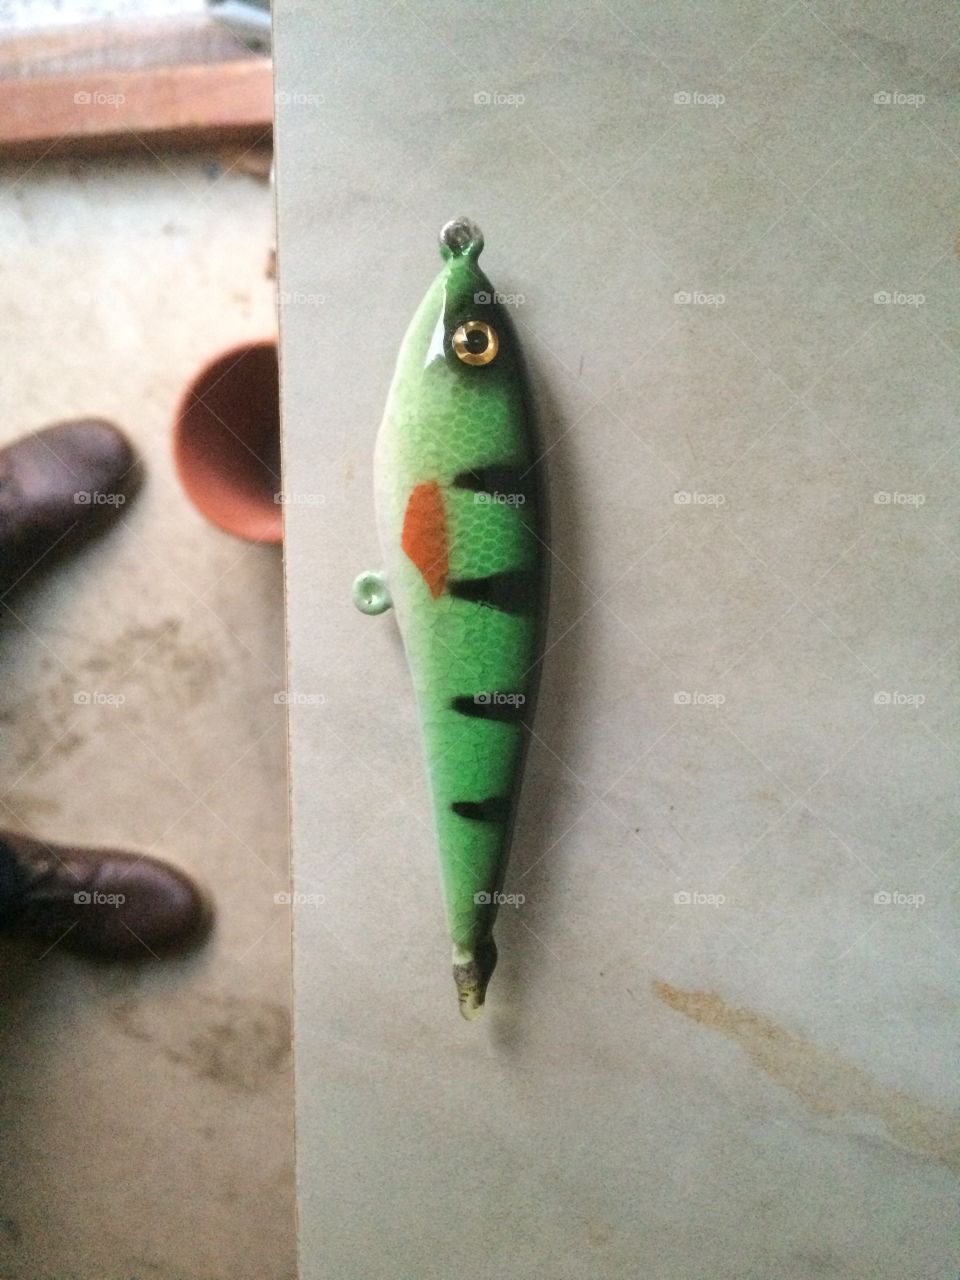 The short story: Homemade fishinglure, Carved from balsawood, sanded, drilled in wights, painted and a clearcoat finish. Ready to catch The big fish :)